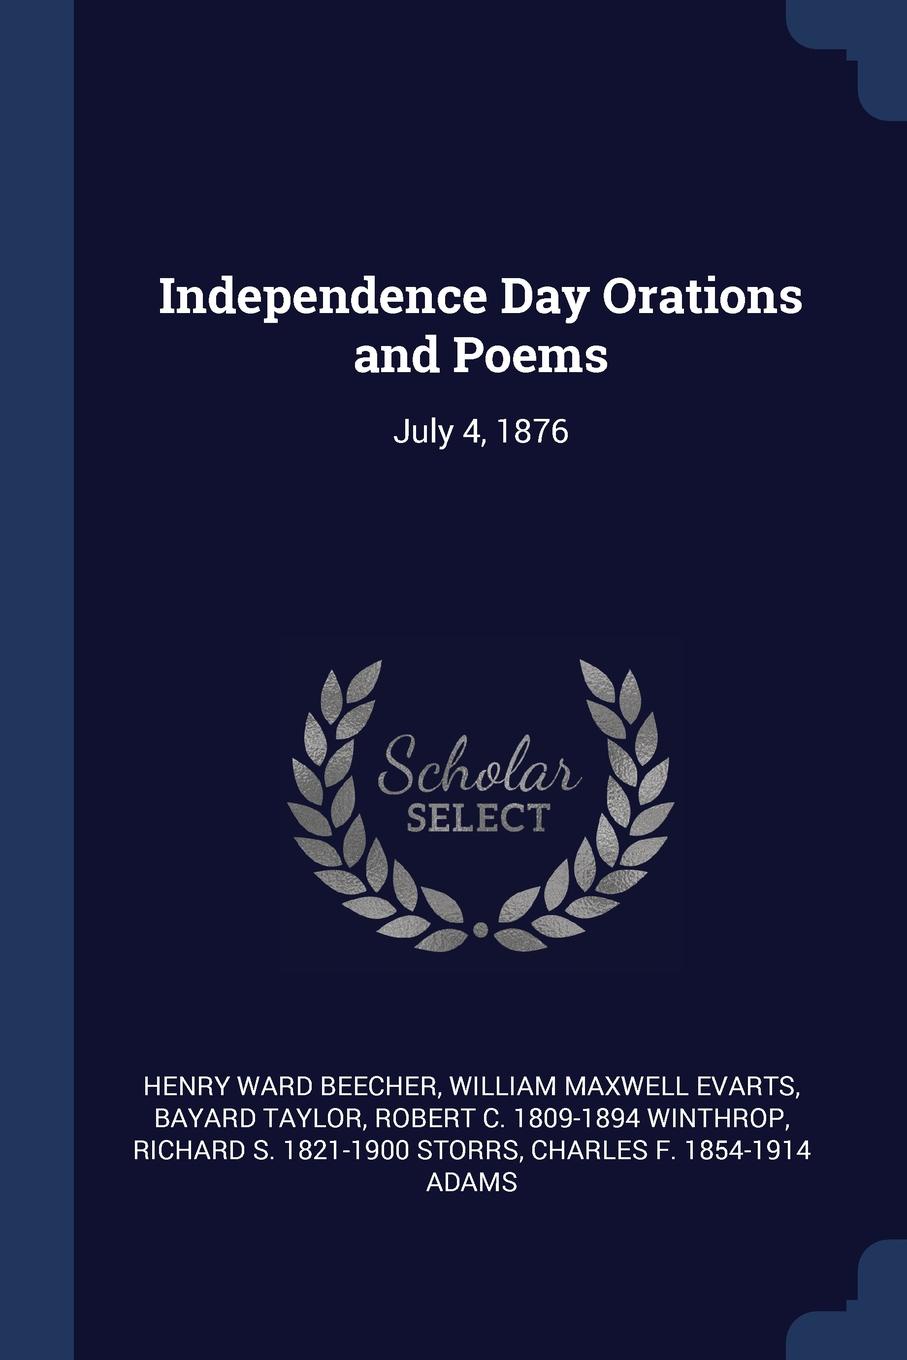 Independence Day Orations and Poems. July 4, 1876